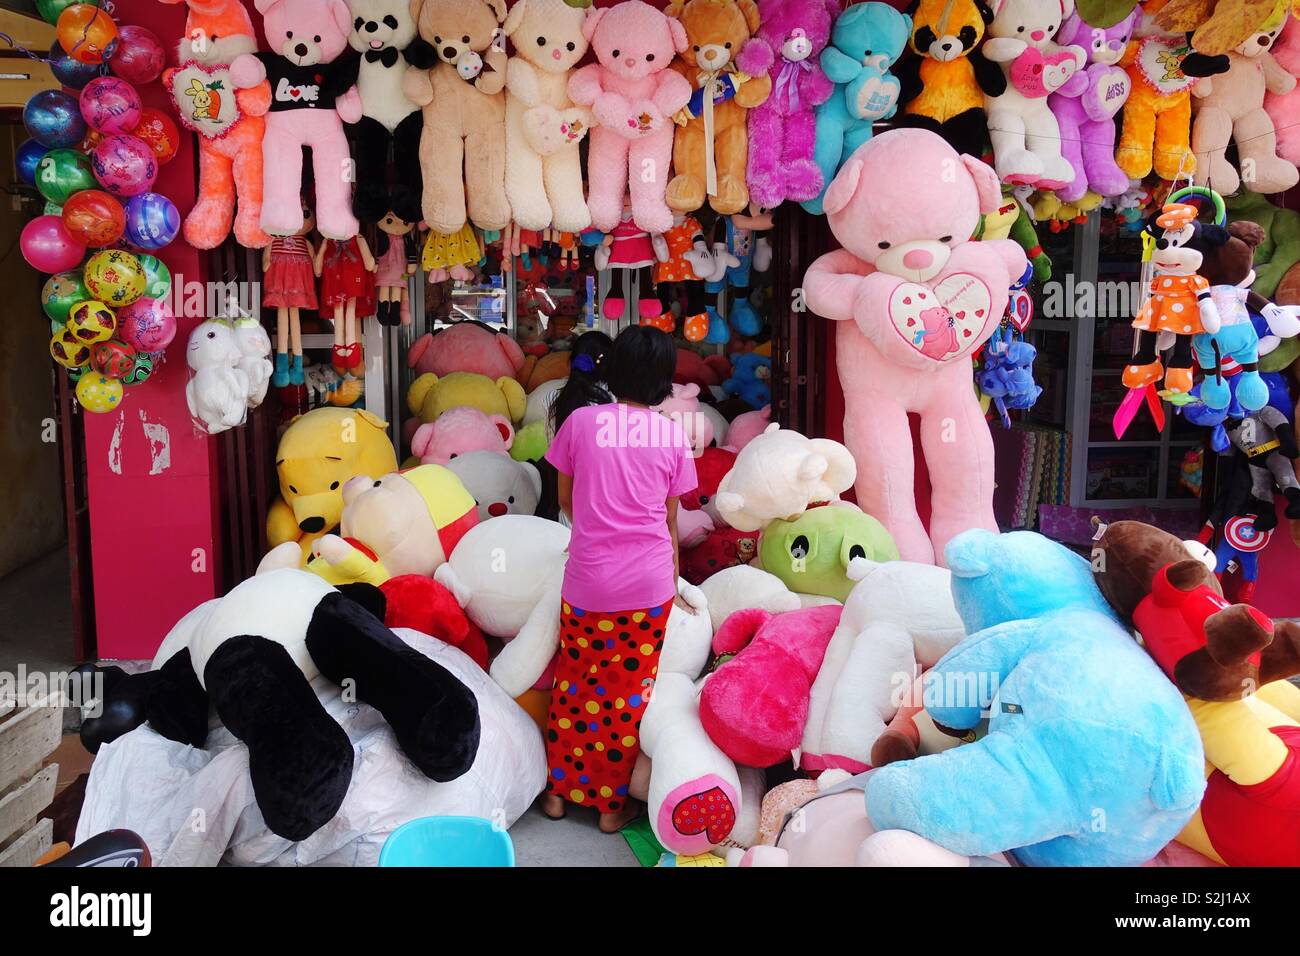 https://c8.alamy.com/comp/S2J1AX/huge-collection-of-stuffed-animals-in-a-shop-in-asia-S2J1AX.jpg